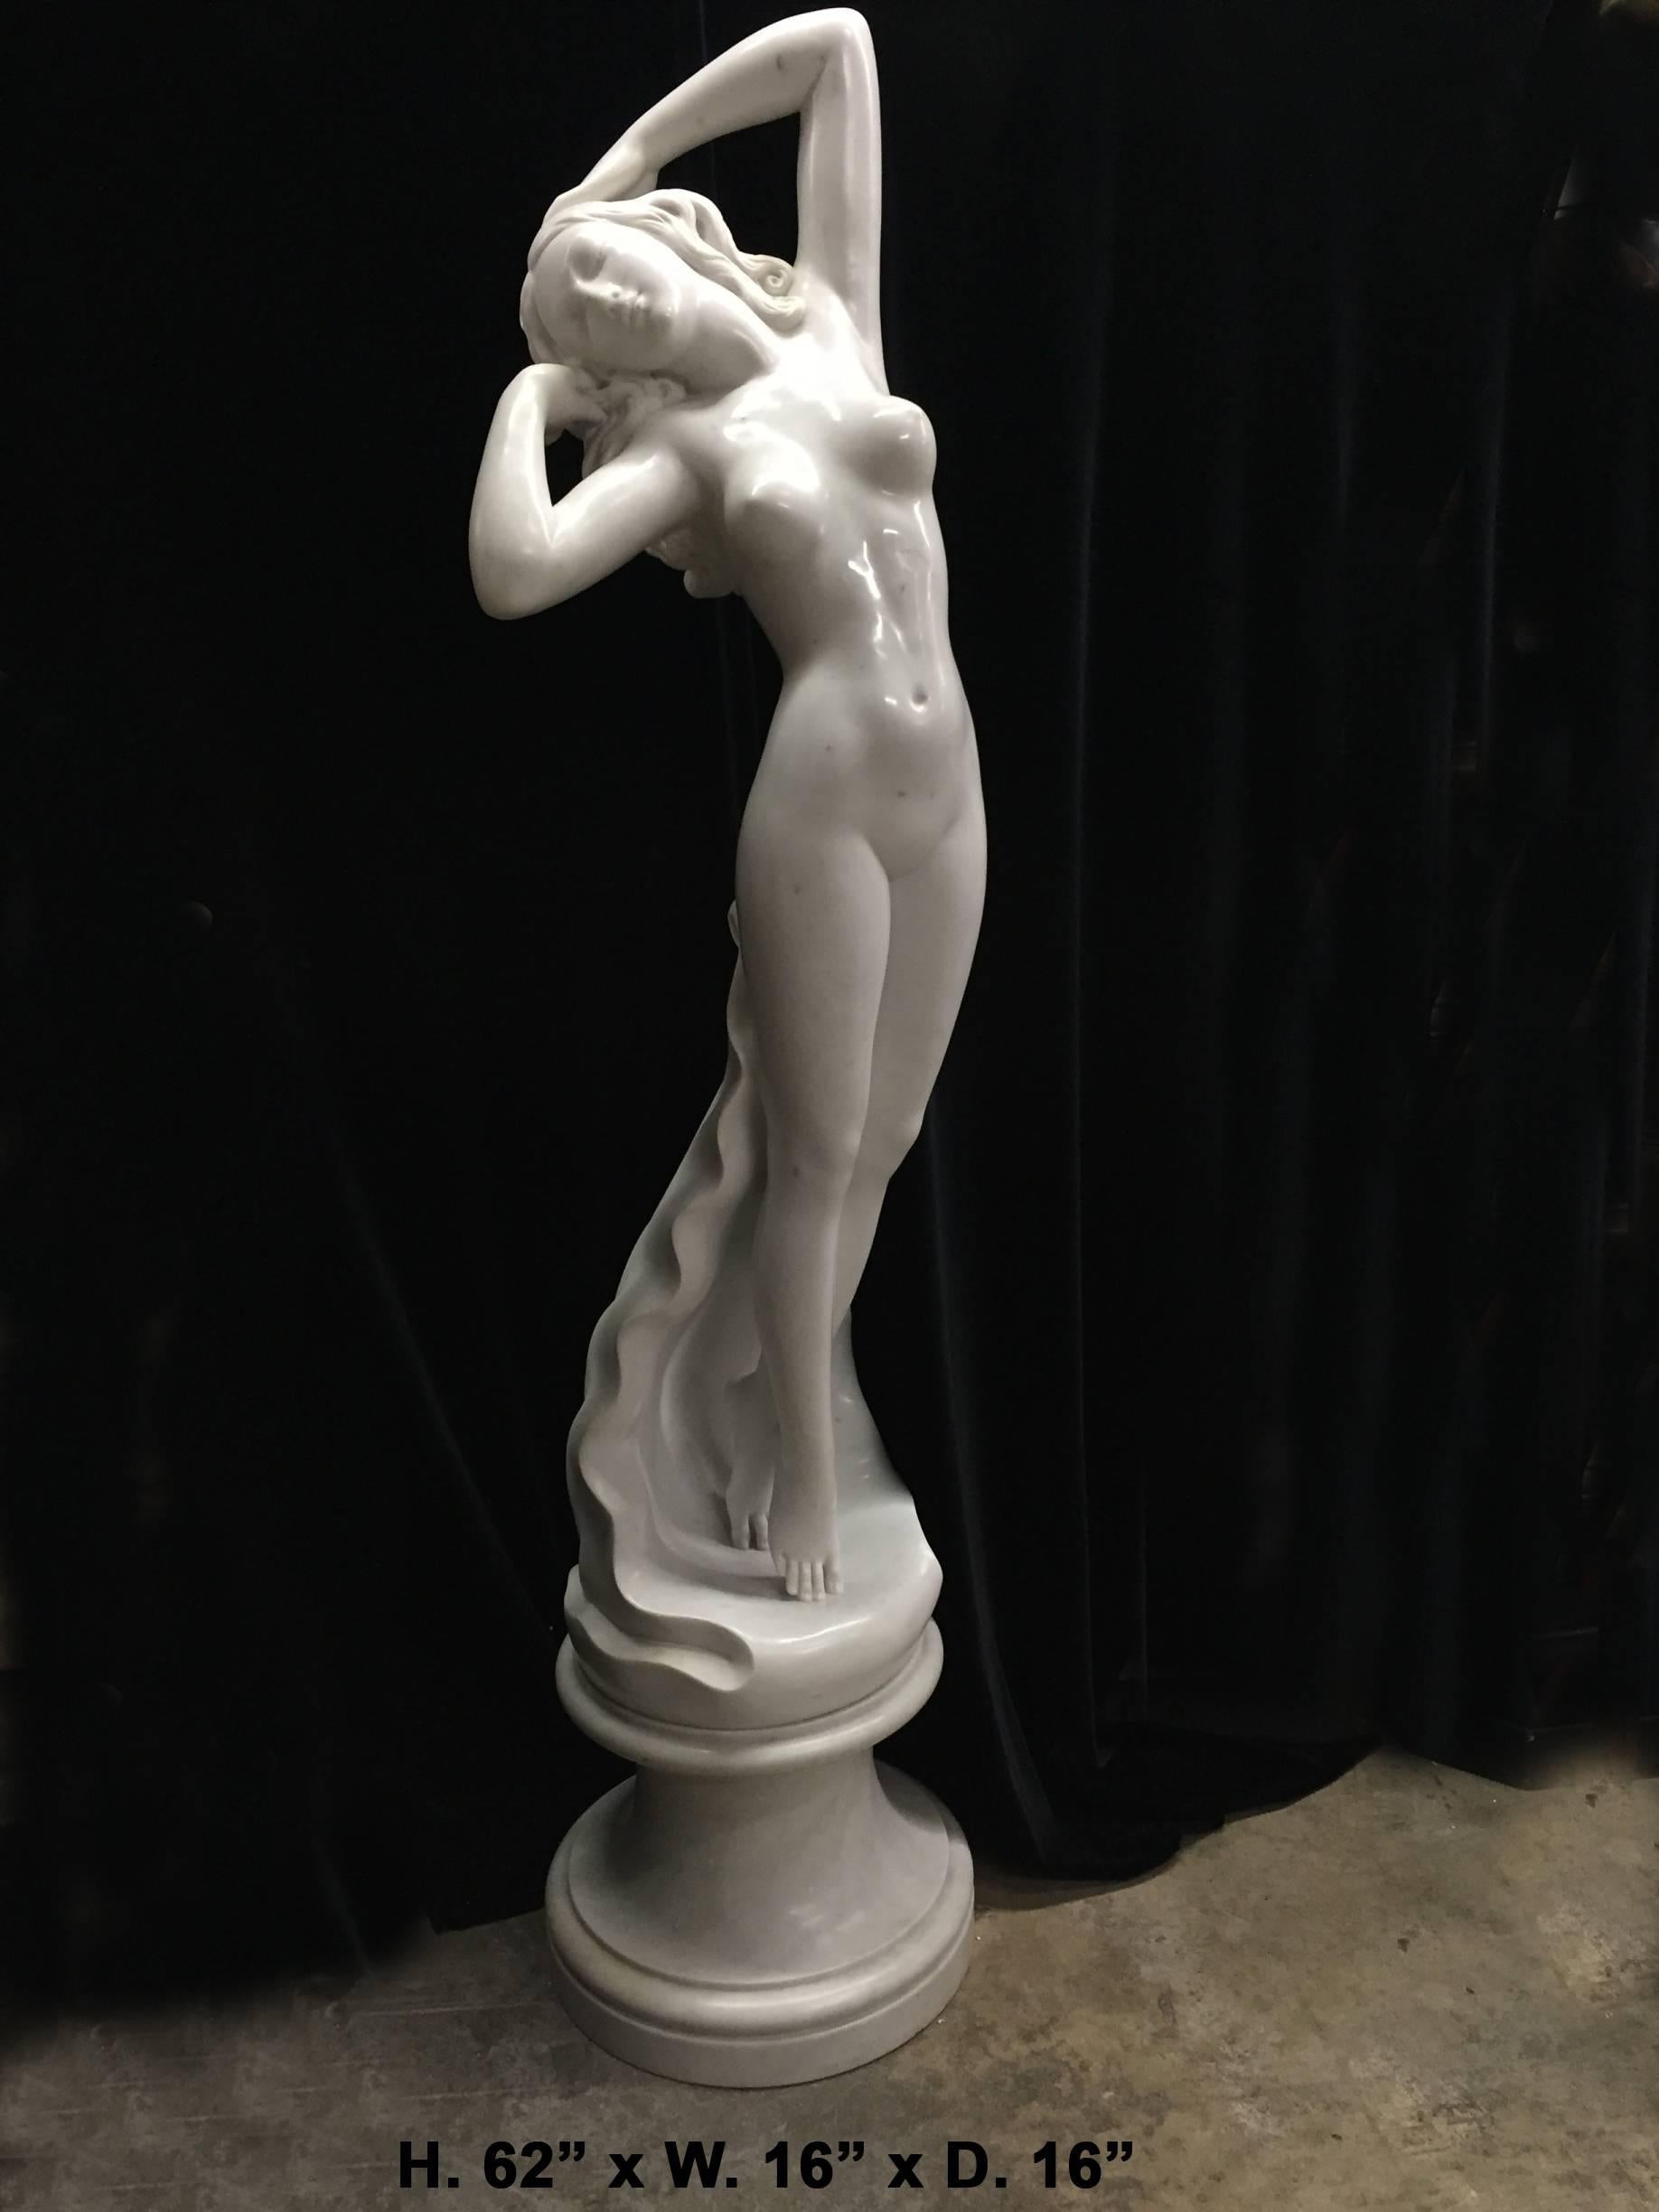 A magnificent and beautiful Italian finely carved white marble statue of a nude maiden rising out of the ocean waves, first half of the 20th century. Her arms elegantly playing with her long hair and a beautiful expression on her face. This statue